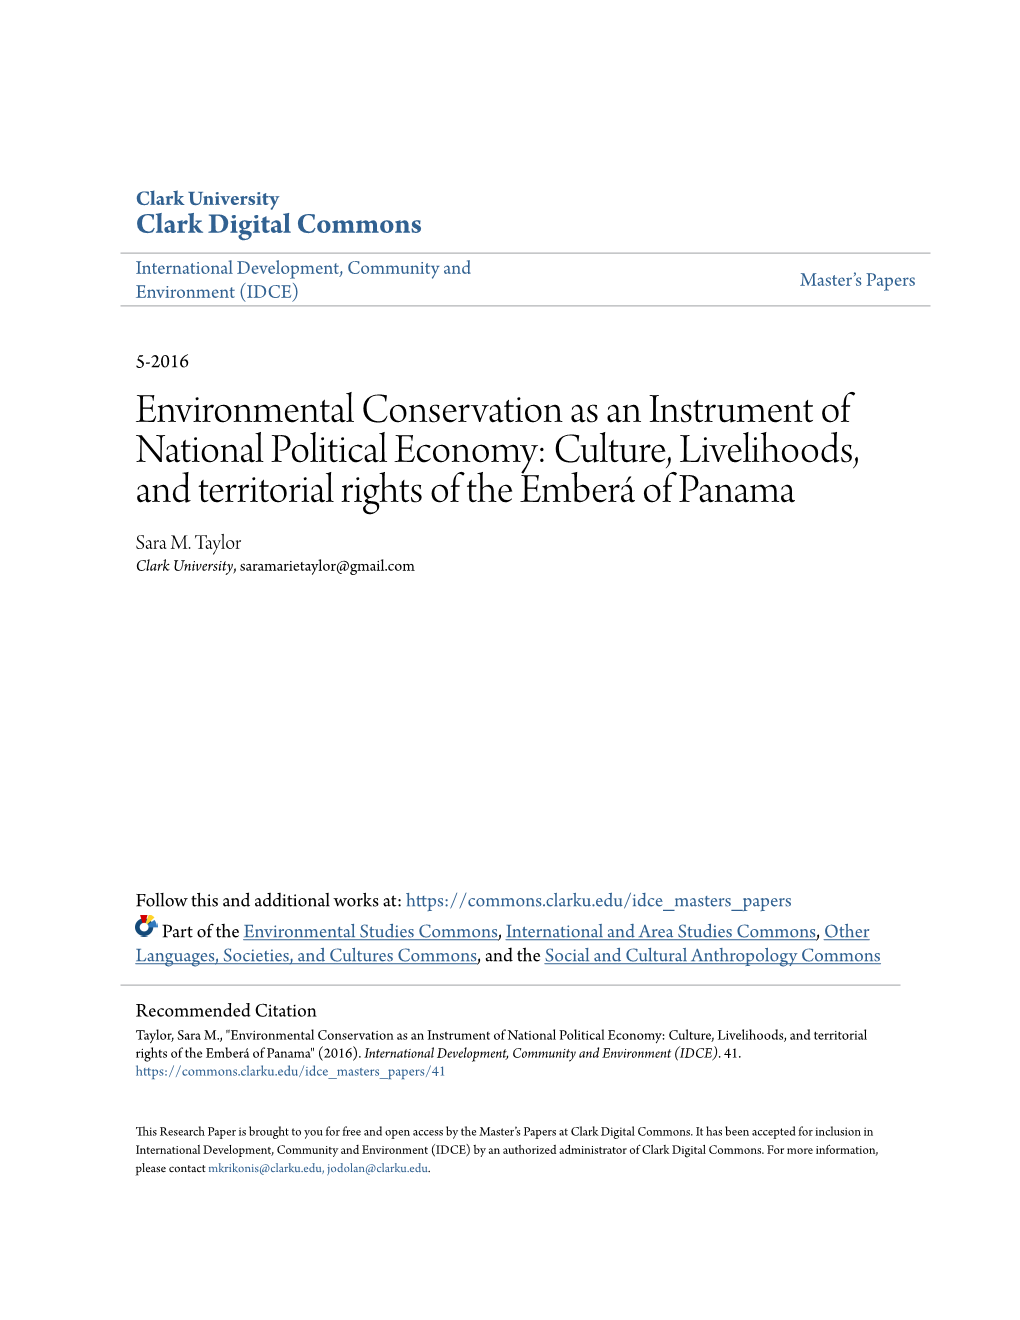 Environmental Conservation As an Instrument of National Political Economy: Culture, Livelihoods, and Territorial Rights of the Emberá of Panama Sara M